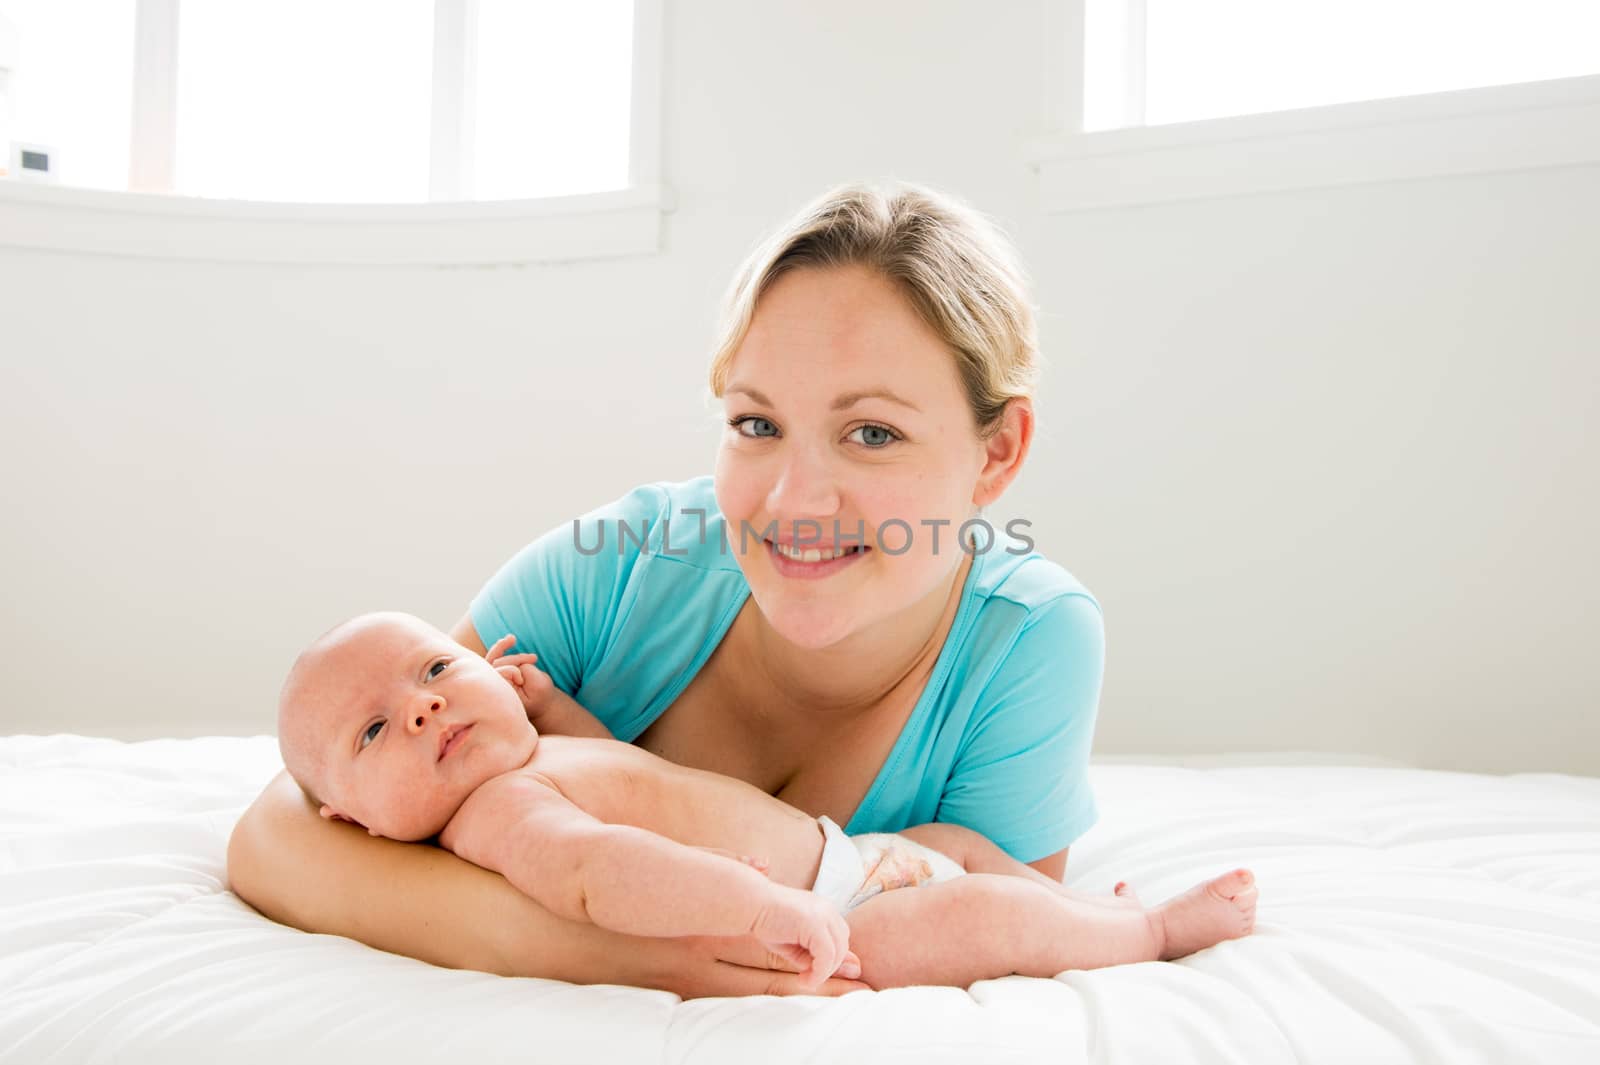 A happy Mother wearing blue shirt holding her newborn baby back lighting with white background